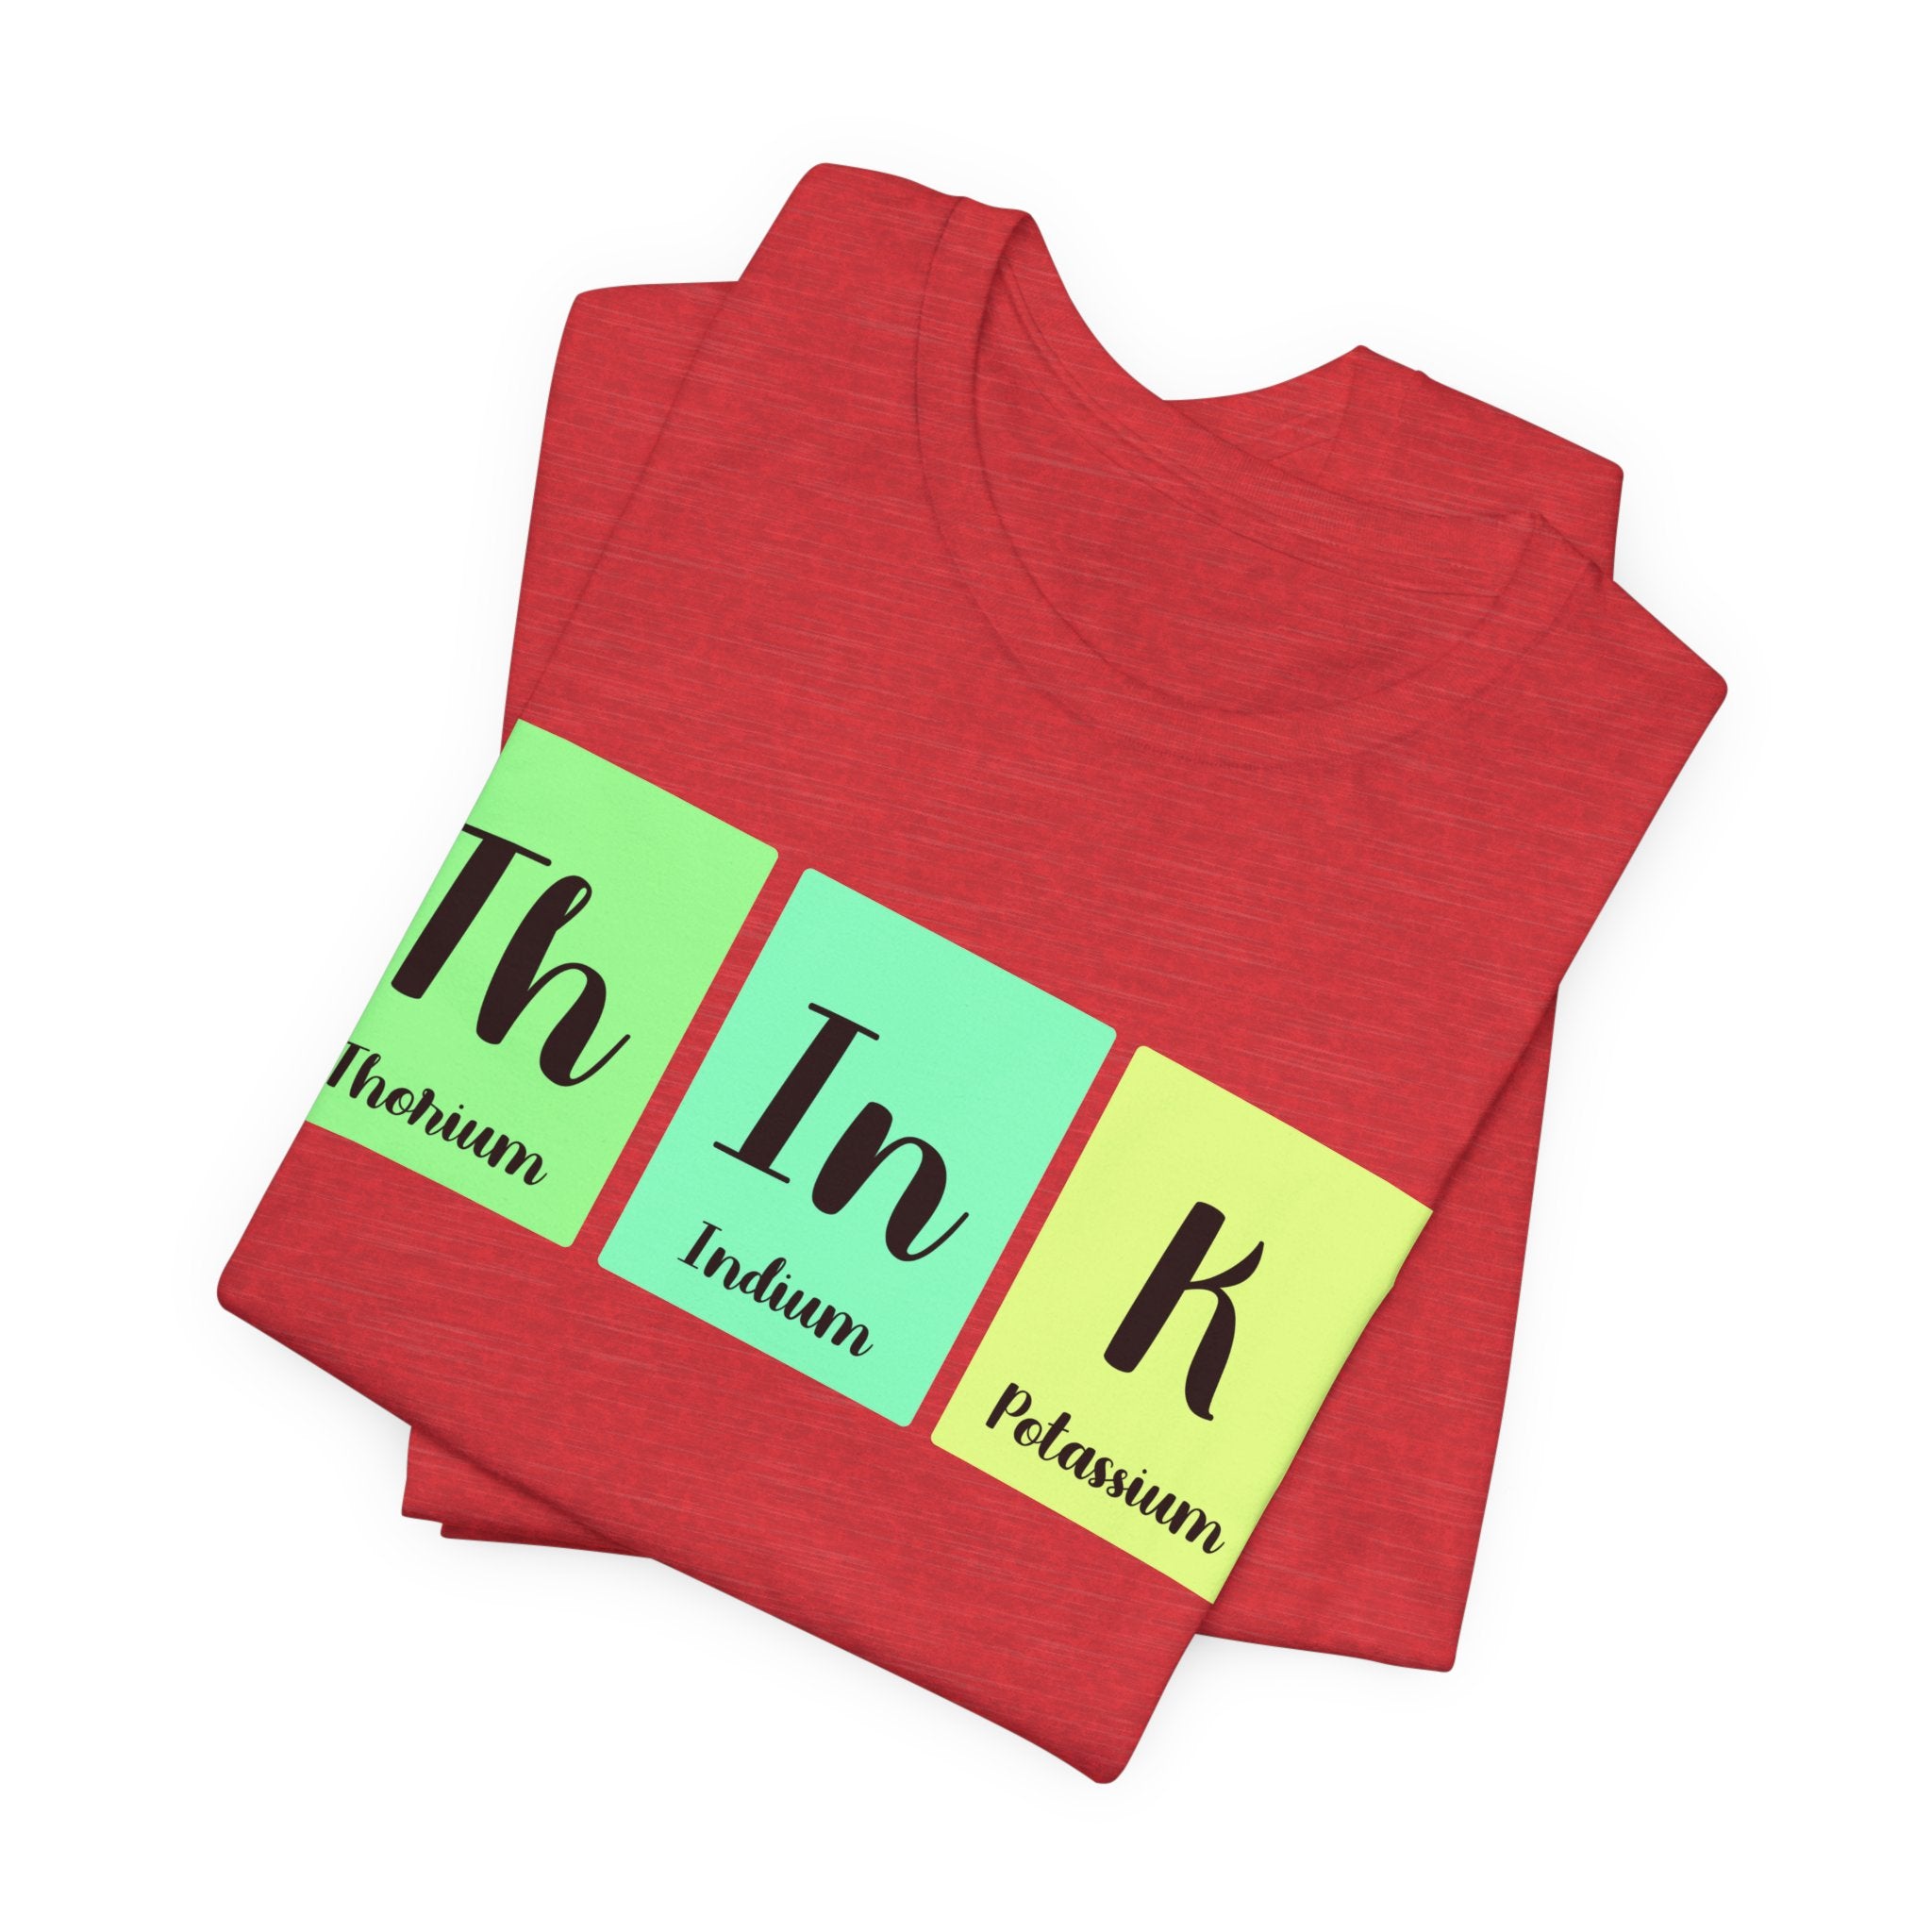 Red Th-In-k unisex jersey tee with the word "think" spelled using the periodic table elements thorium (Th), indium (In), and potassium (K) on a white background.